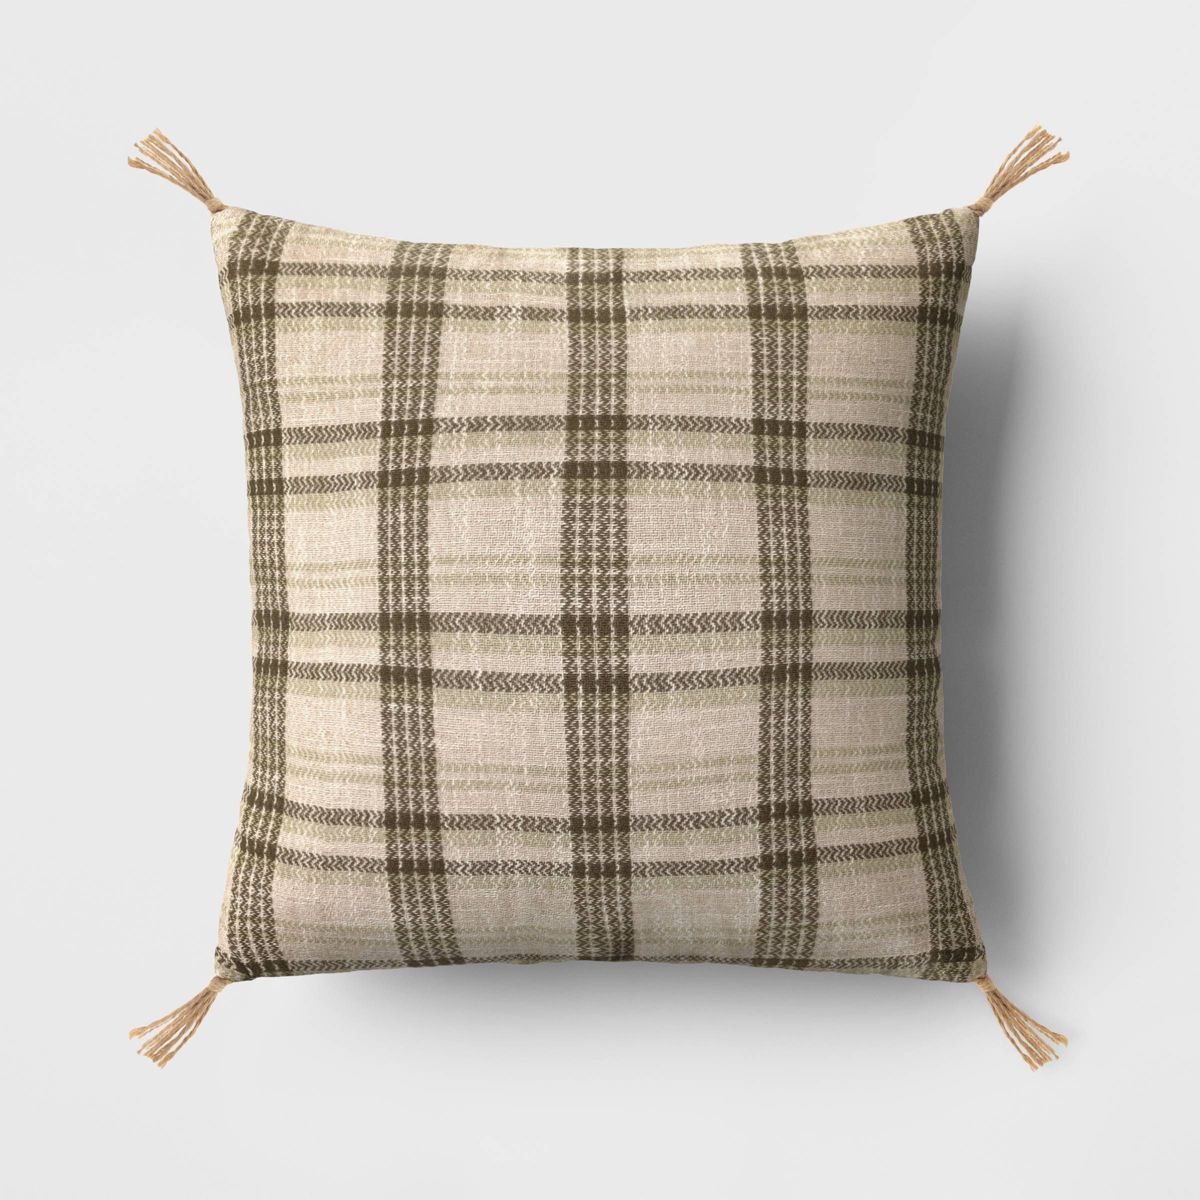 Oversized Cotton Woven Plaid Square Throw Pillow with Tassels Olive Green - Threshold™ | Target